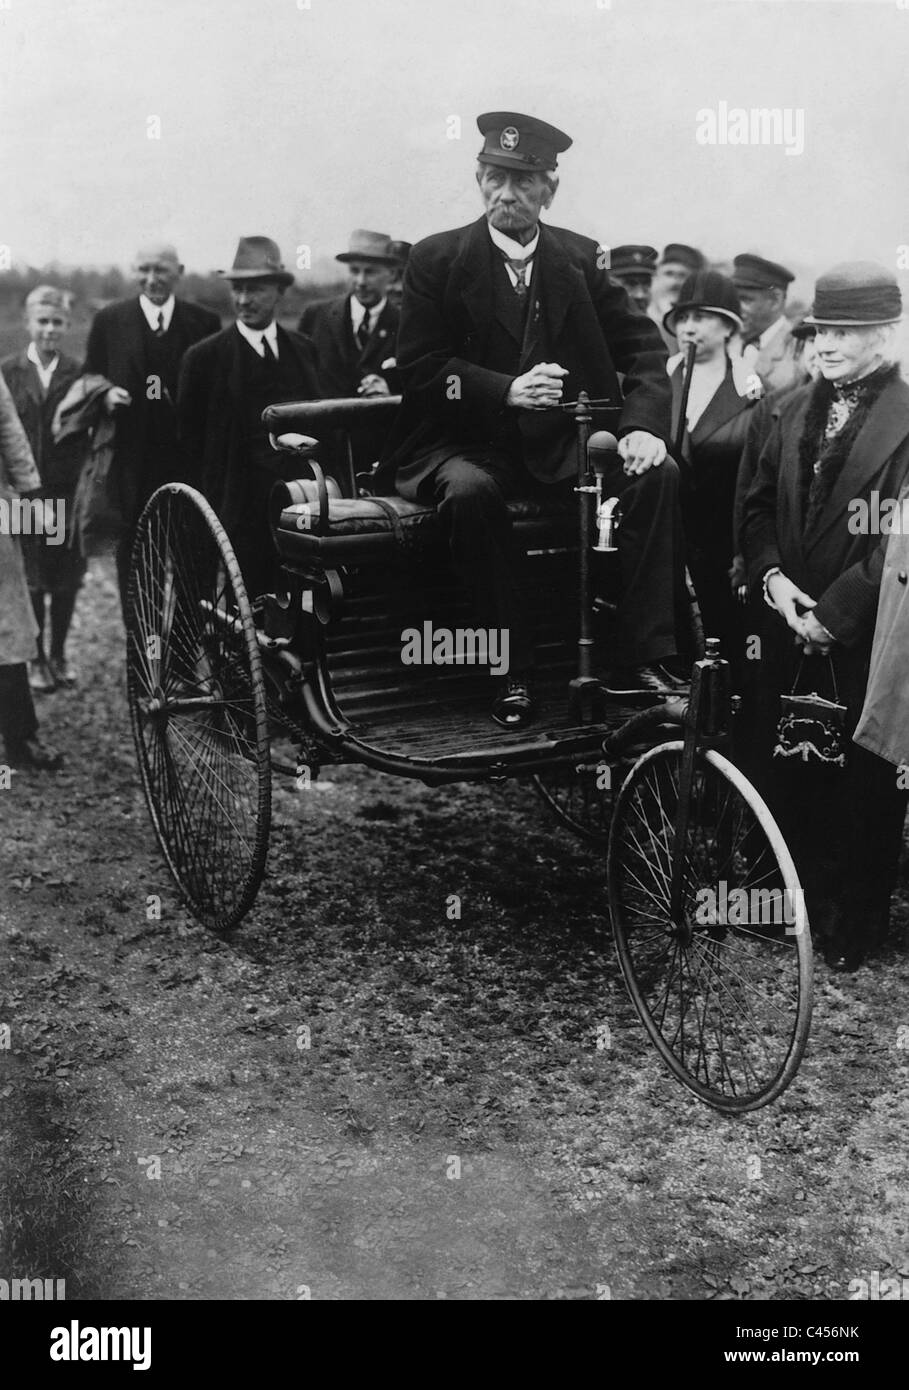 Carl Friedrich Benz in the Benz motor car from 1885, 1925 Stock Photo